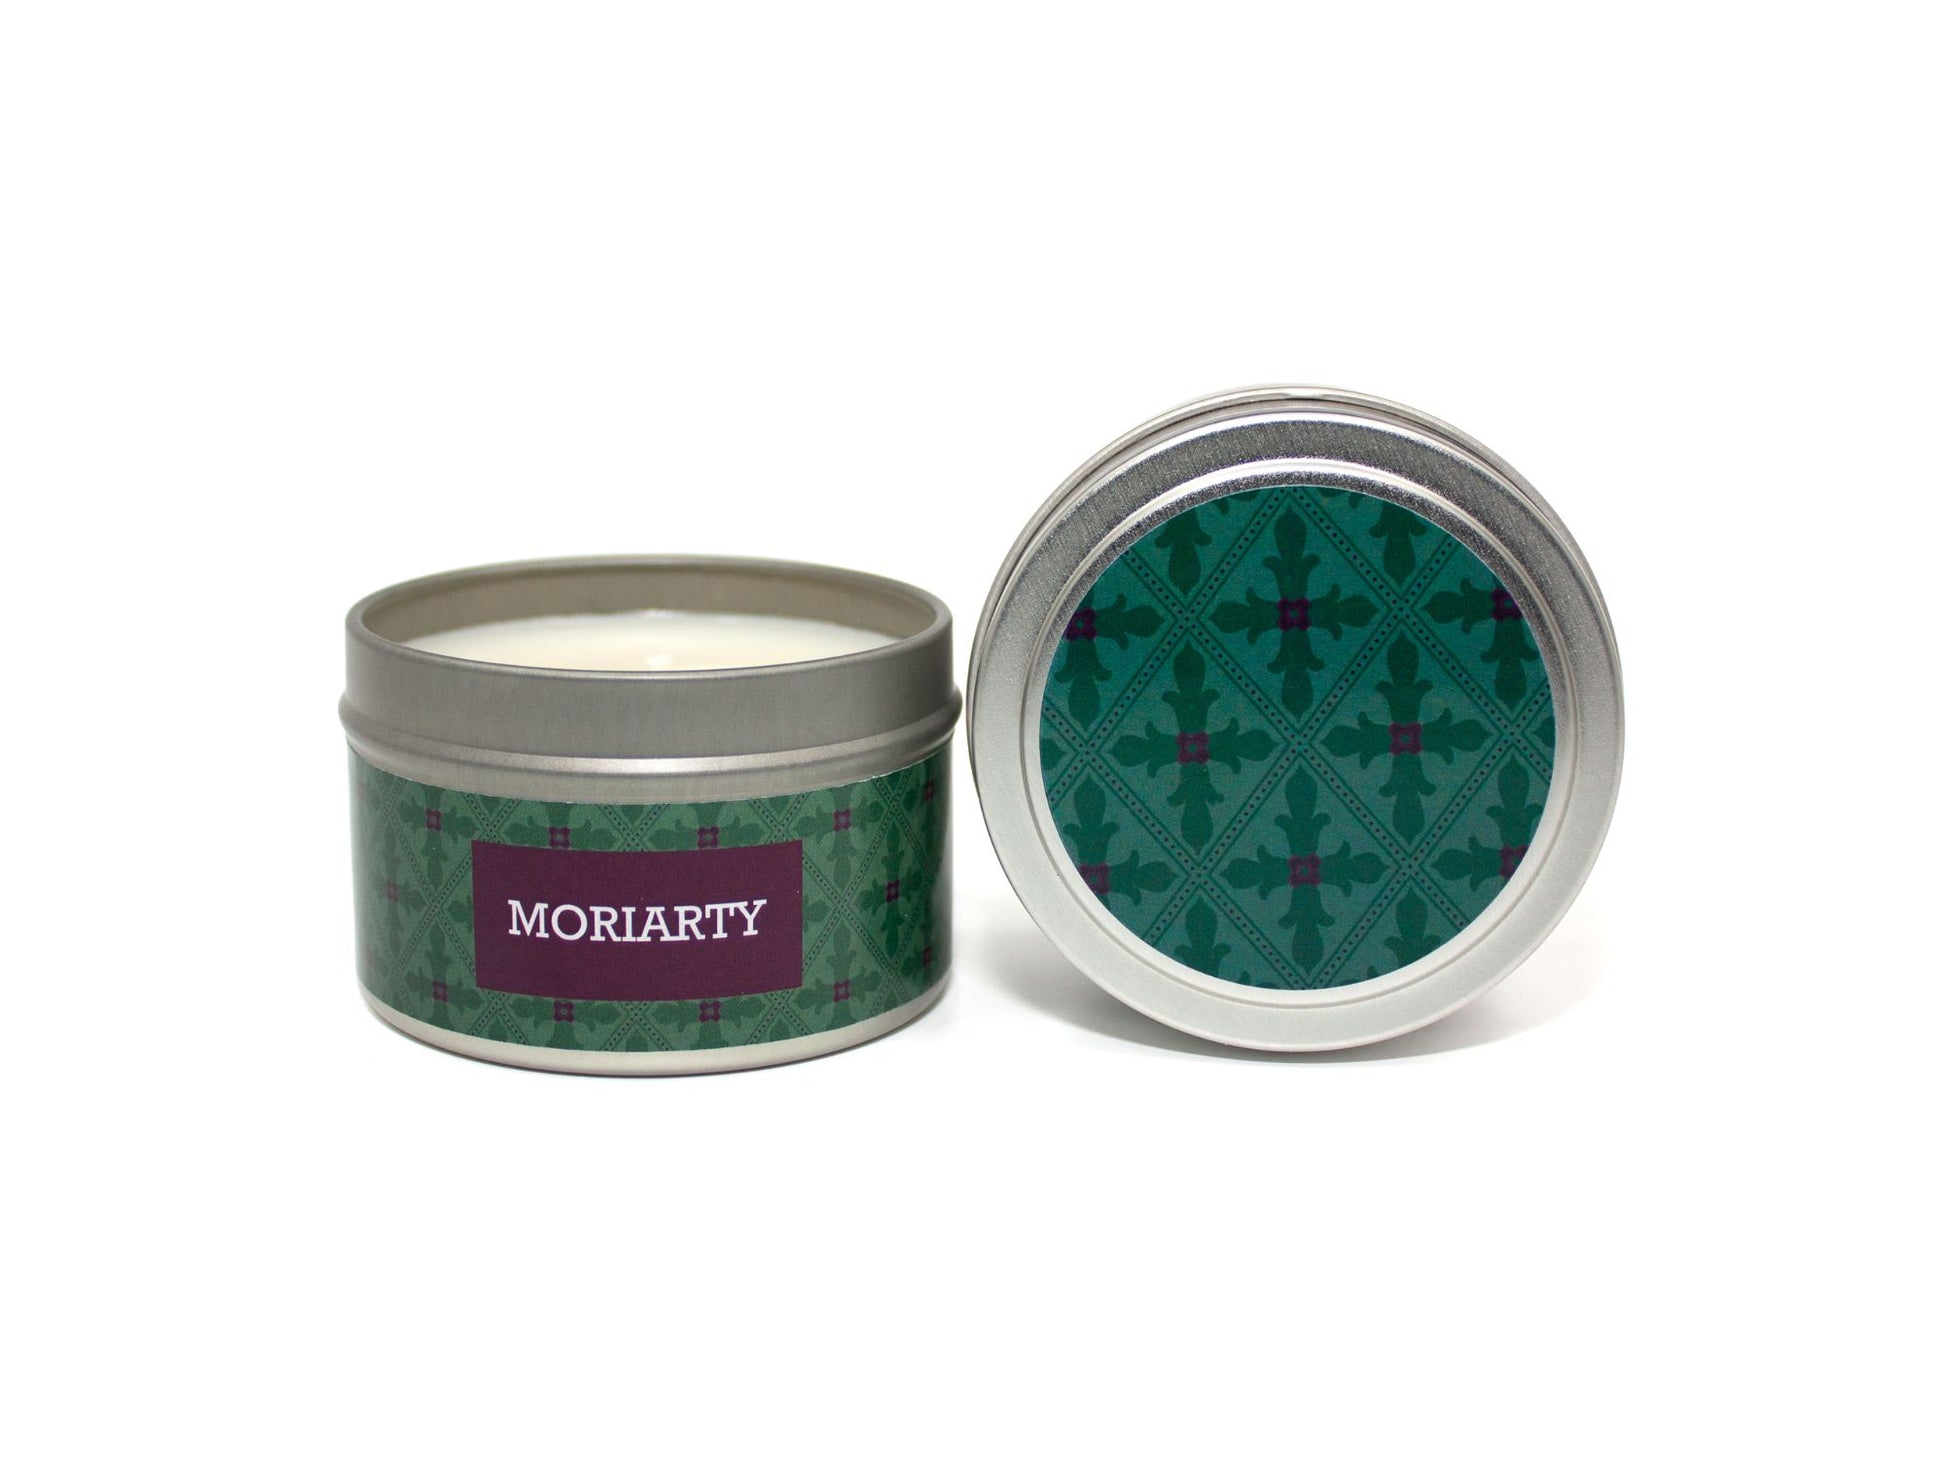 Onset & Rime fig and vetiver scented candle called "Moriarty" in a 4 oz silver tin. The circular label on top is a deep green gothic-style pattern. The text on the front label is "Moriarty - Fig, Vetiver, Suede".